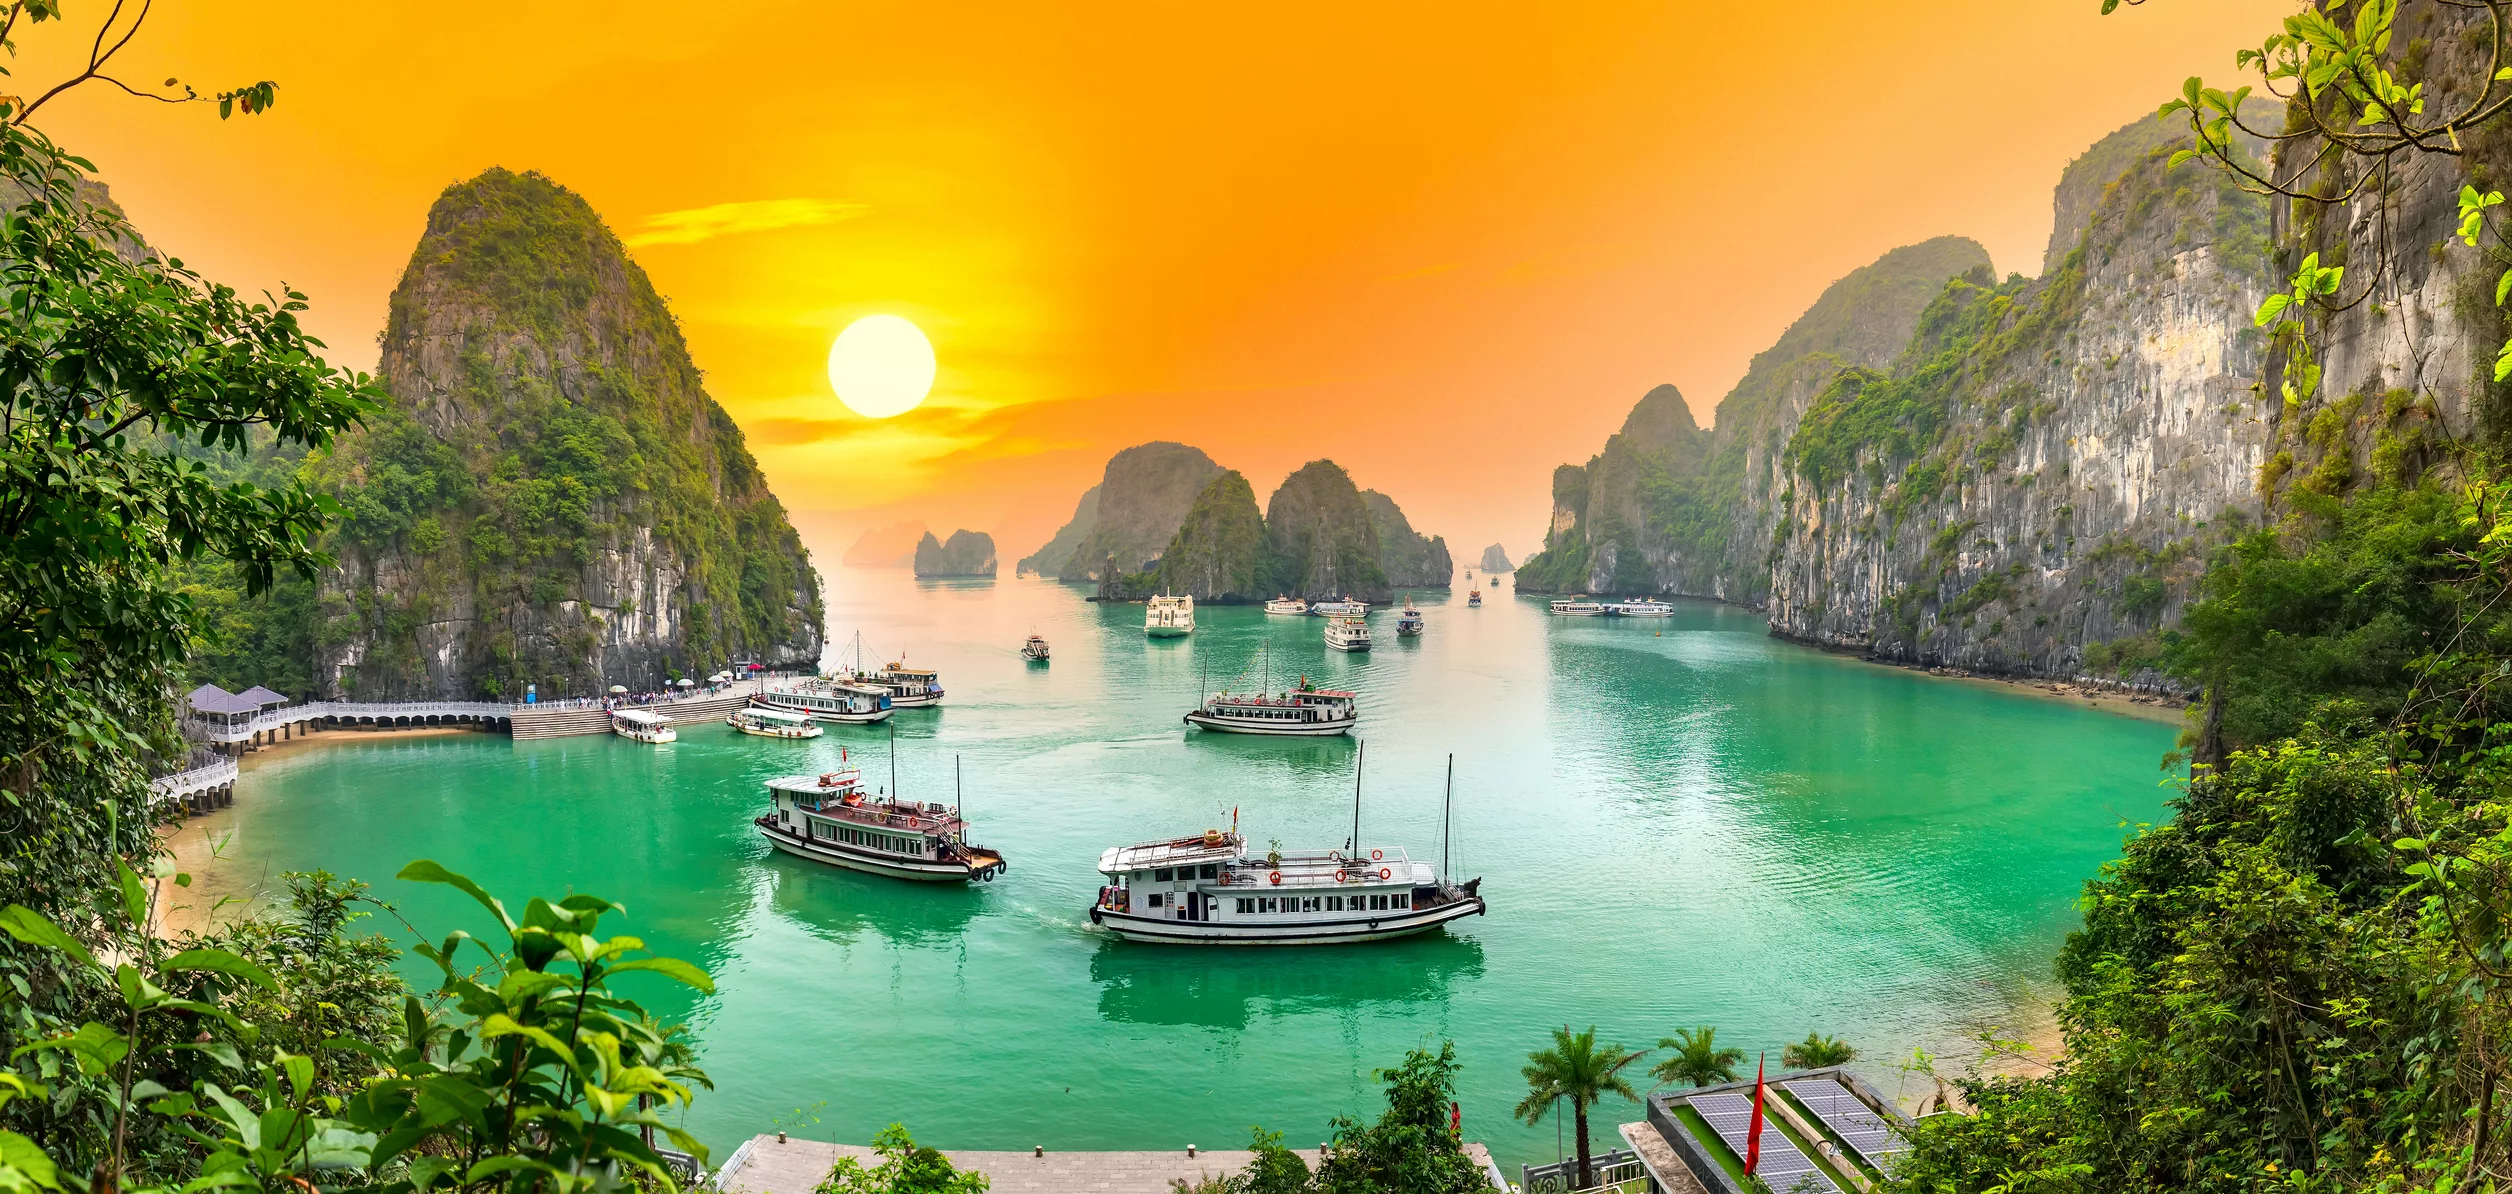 Hạ Long Bay at sunset, with emerald waters and a number of boats anchored in the bay.